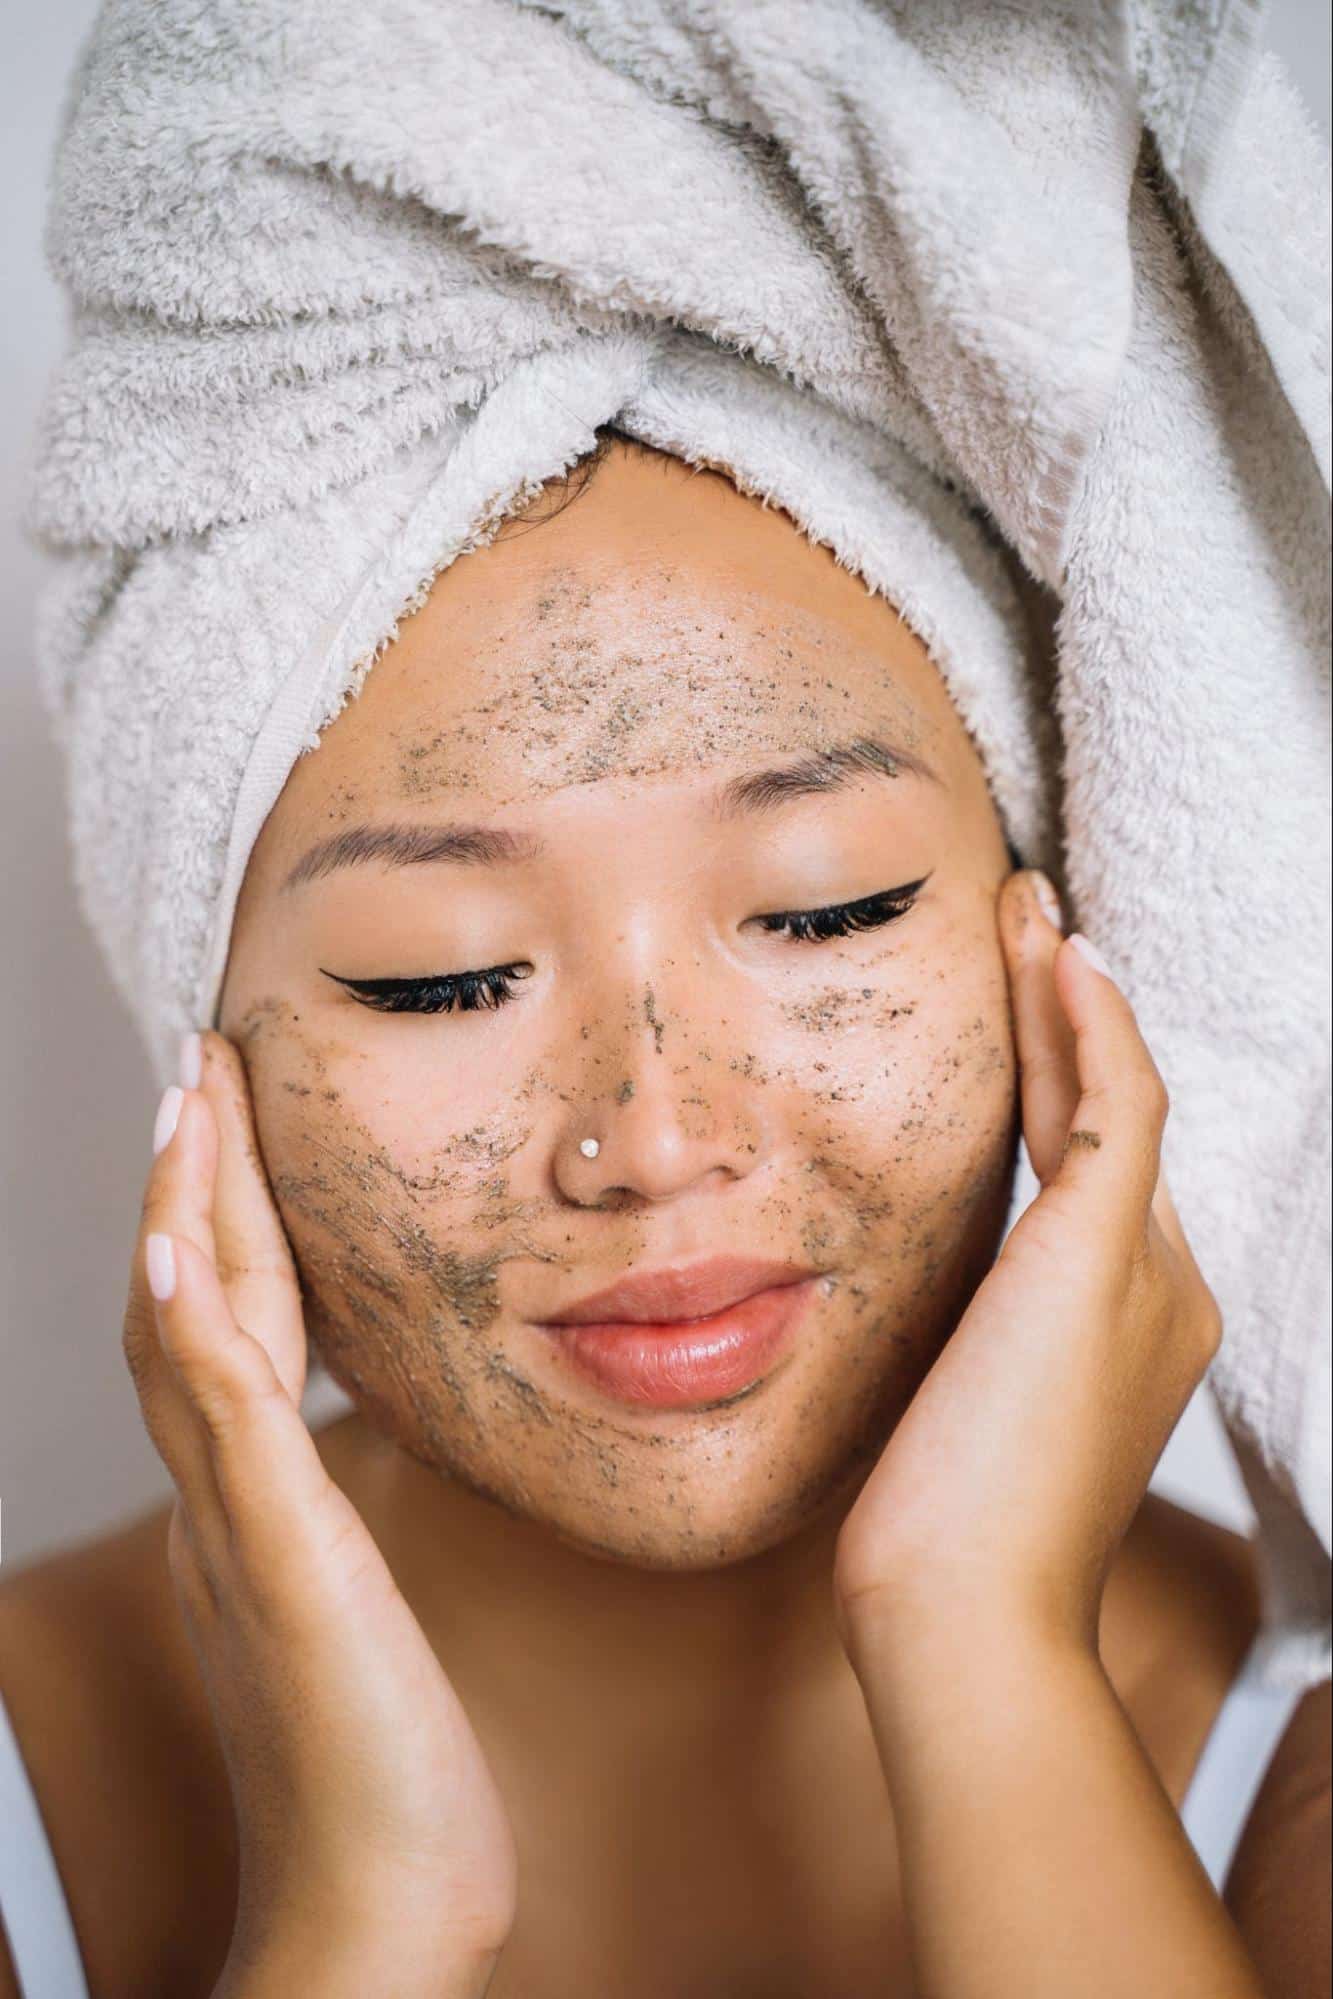 A lady scrubbing her face to remove dead skin cells and impurities